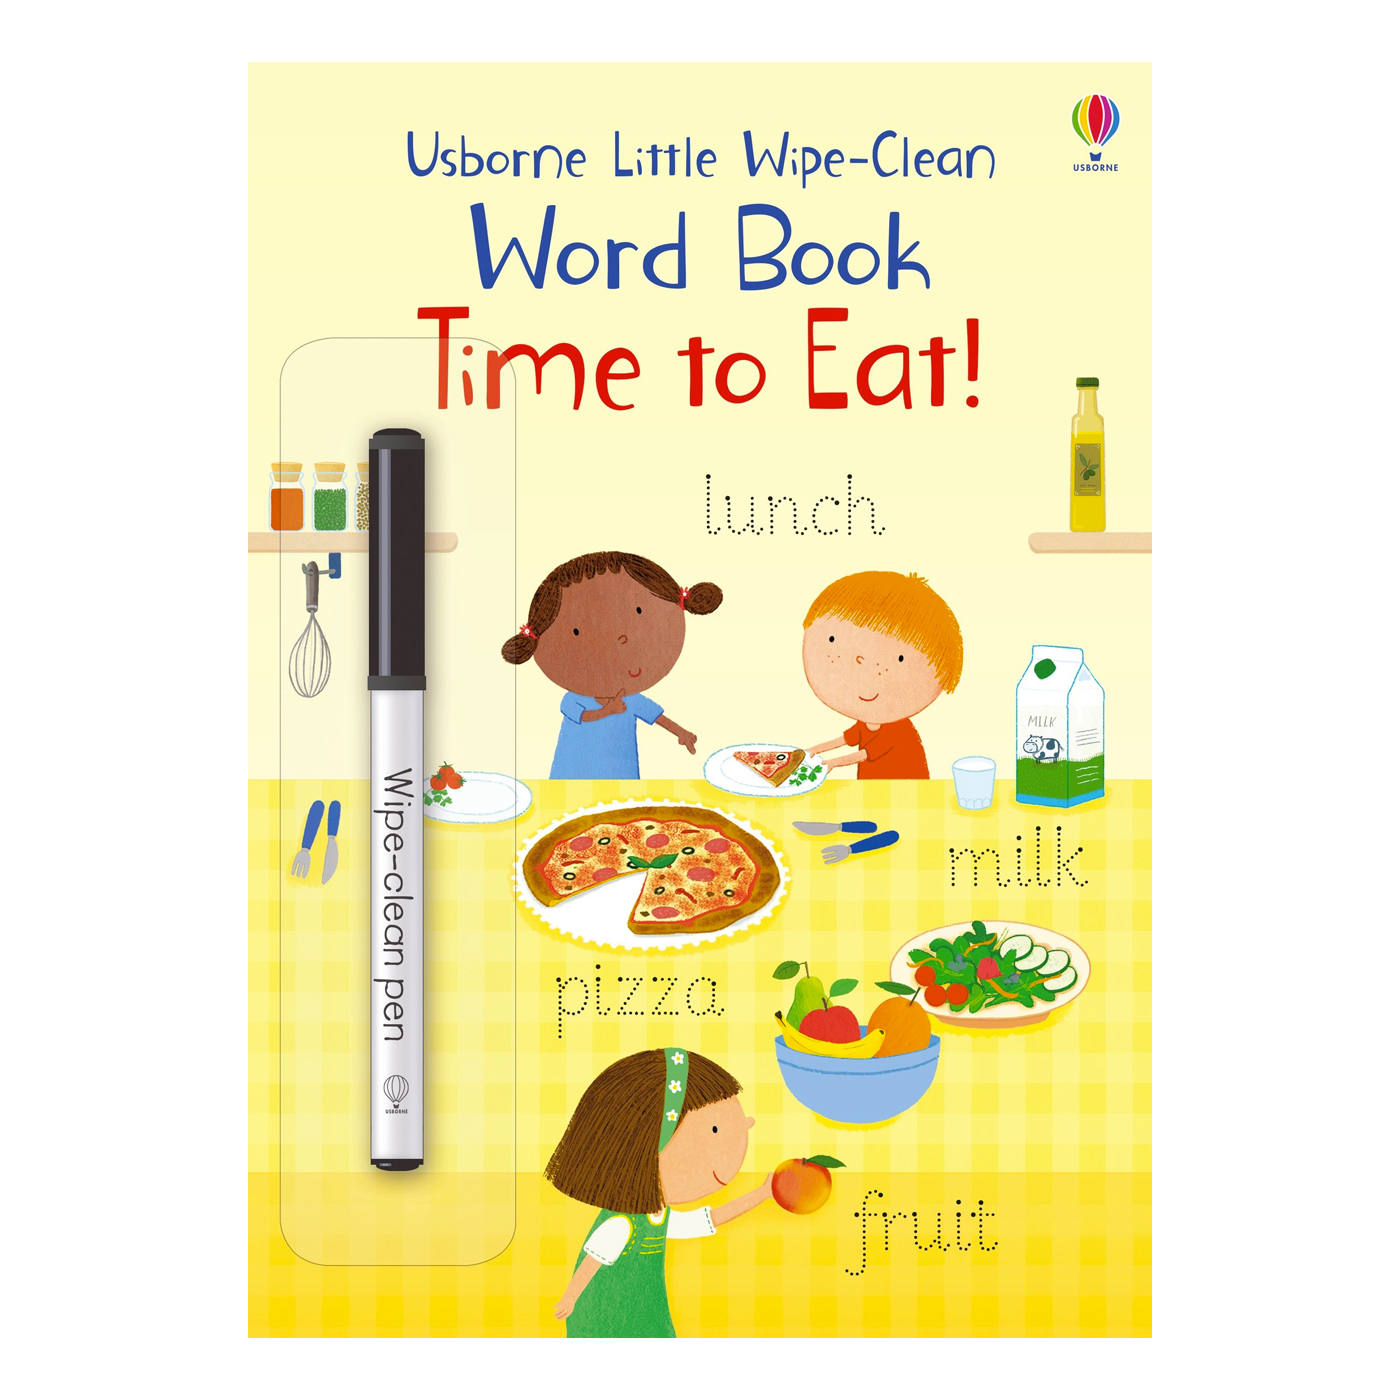  Little Wipe-Clean Word Book Time to Eat!